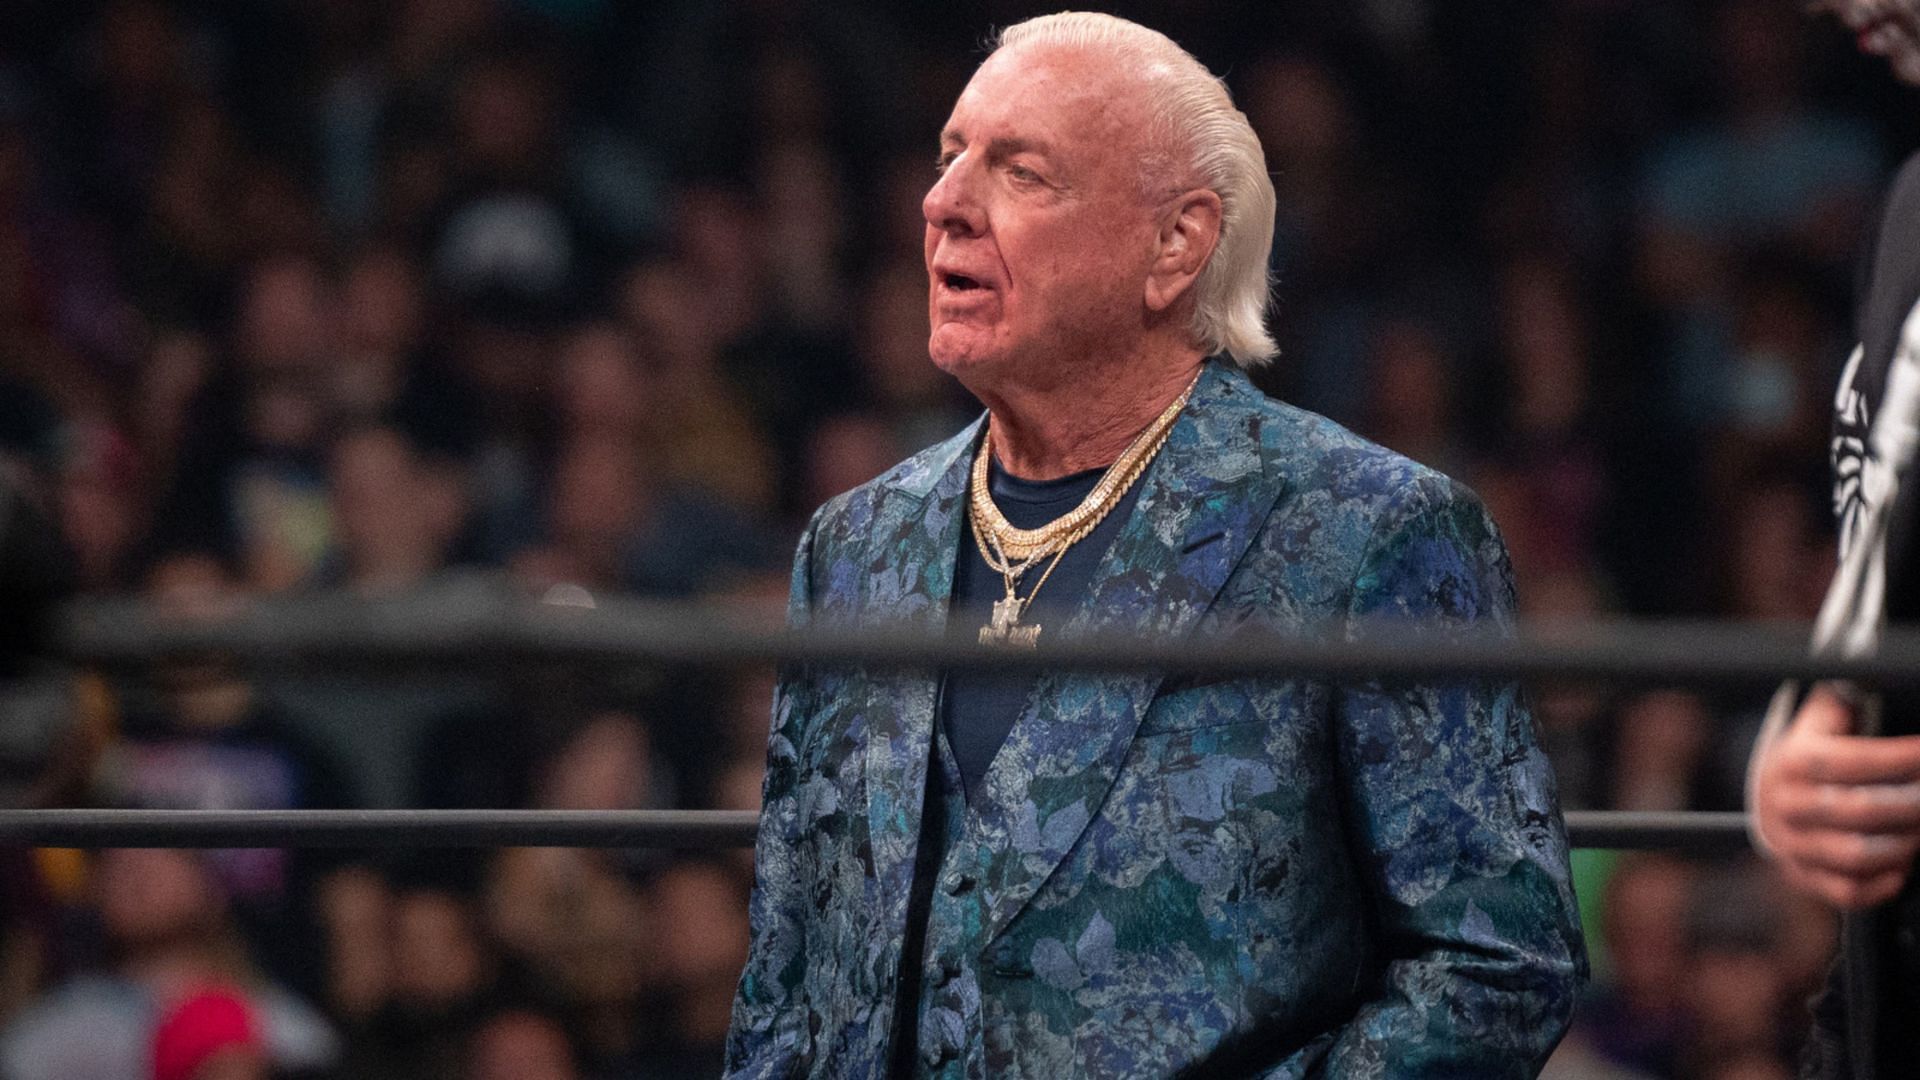 WWE Hall of Famer Ric Flair recently joined AEW